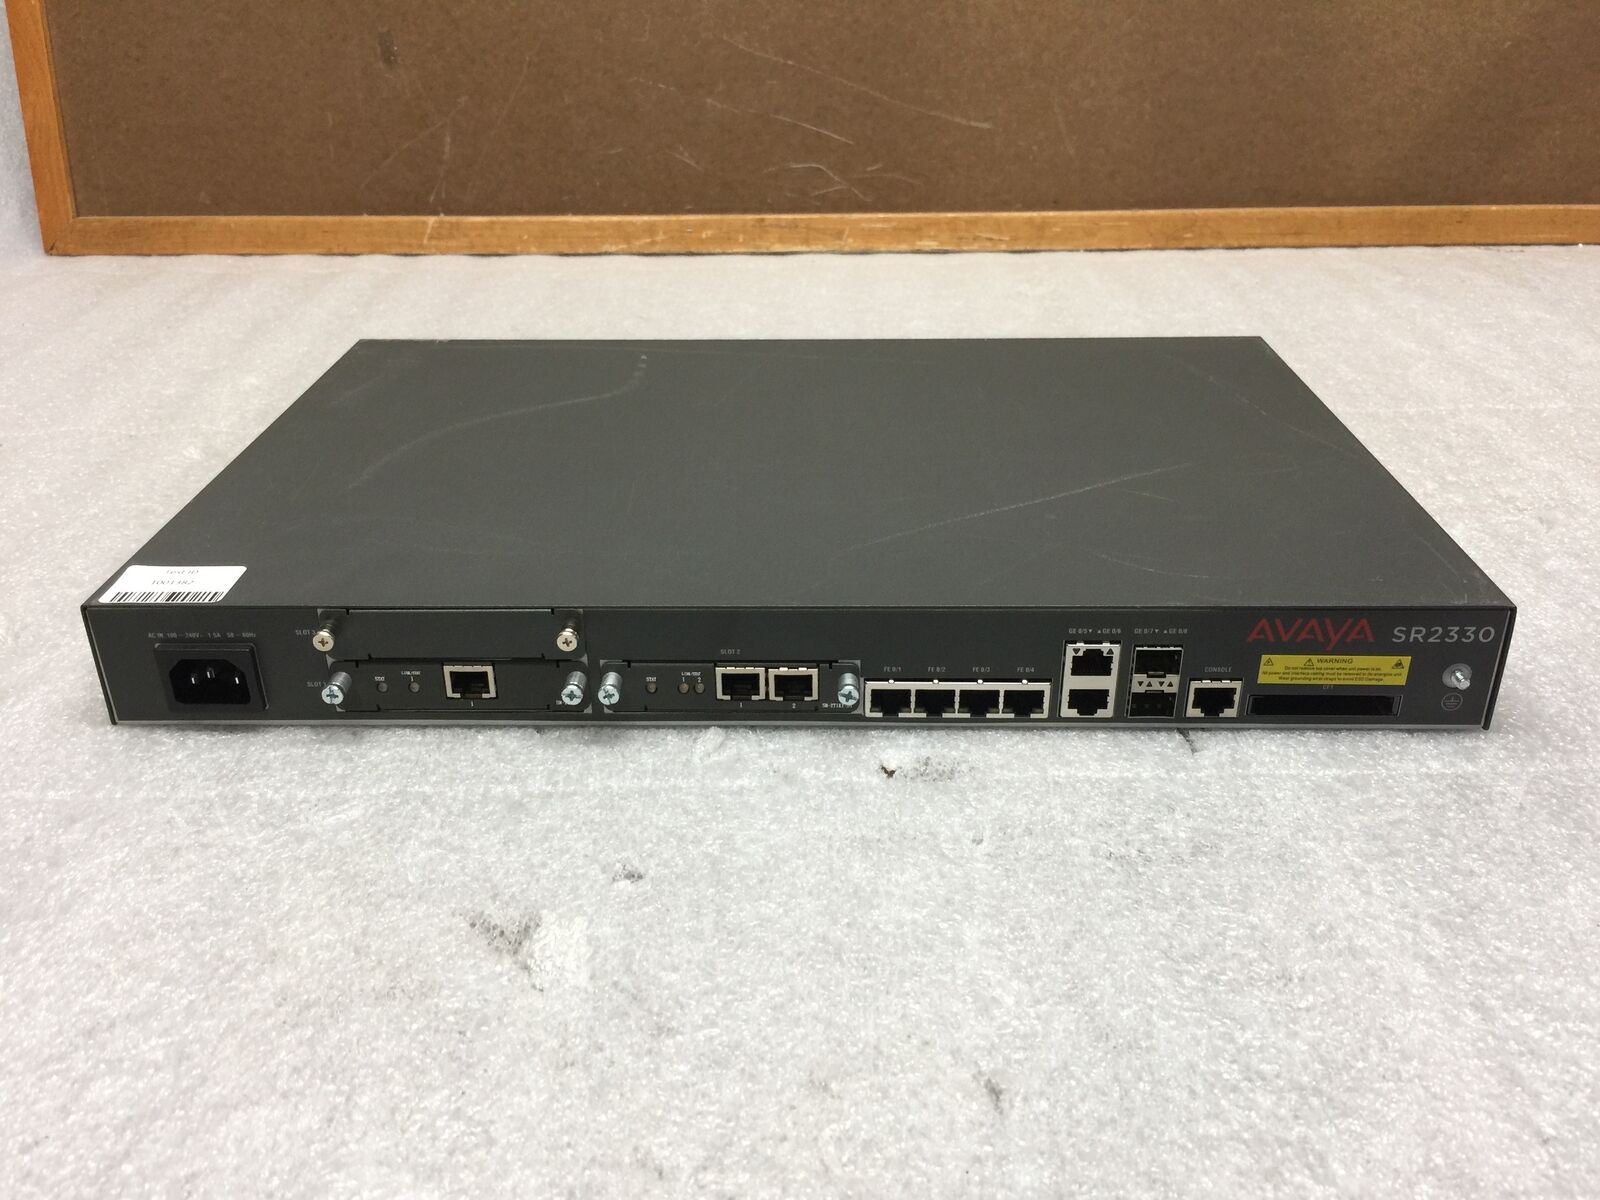 Avaya Nortel 3-Slot Secure Router SR2330, with 2 Cards, Tested and Working